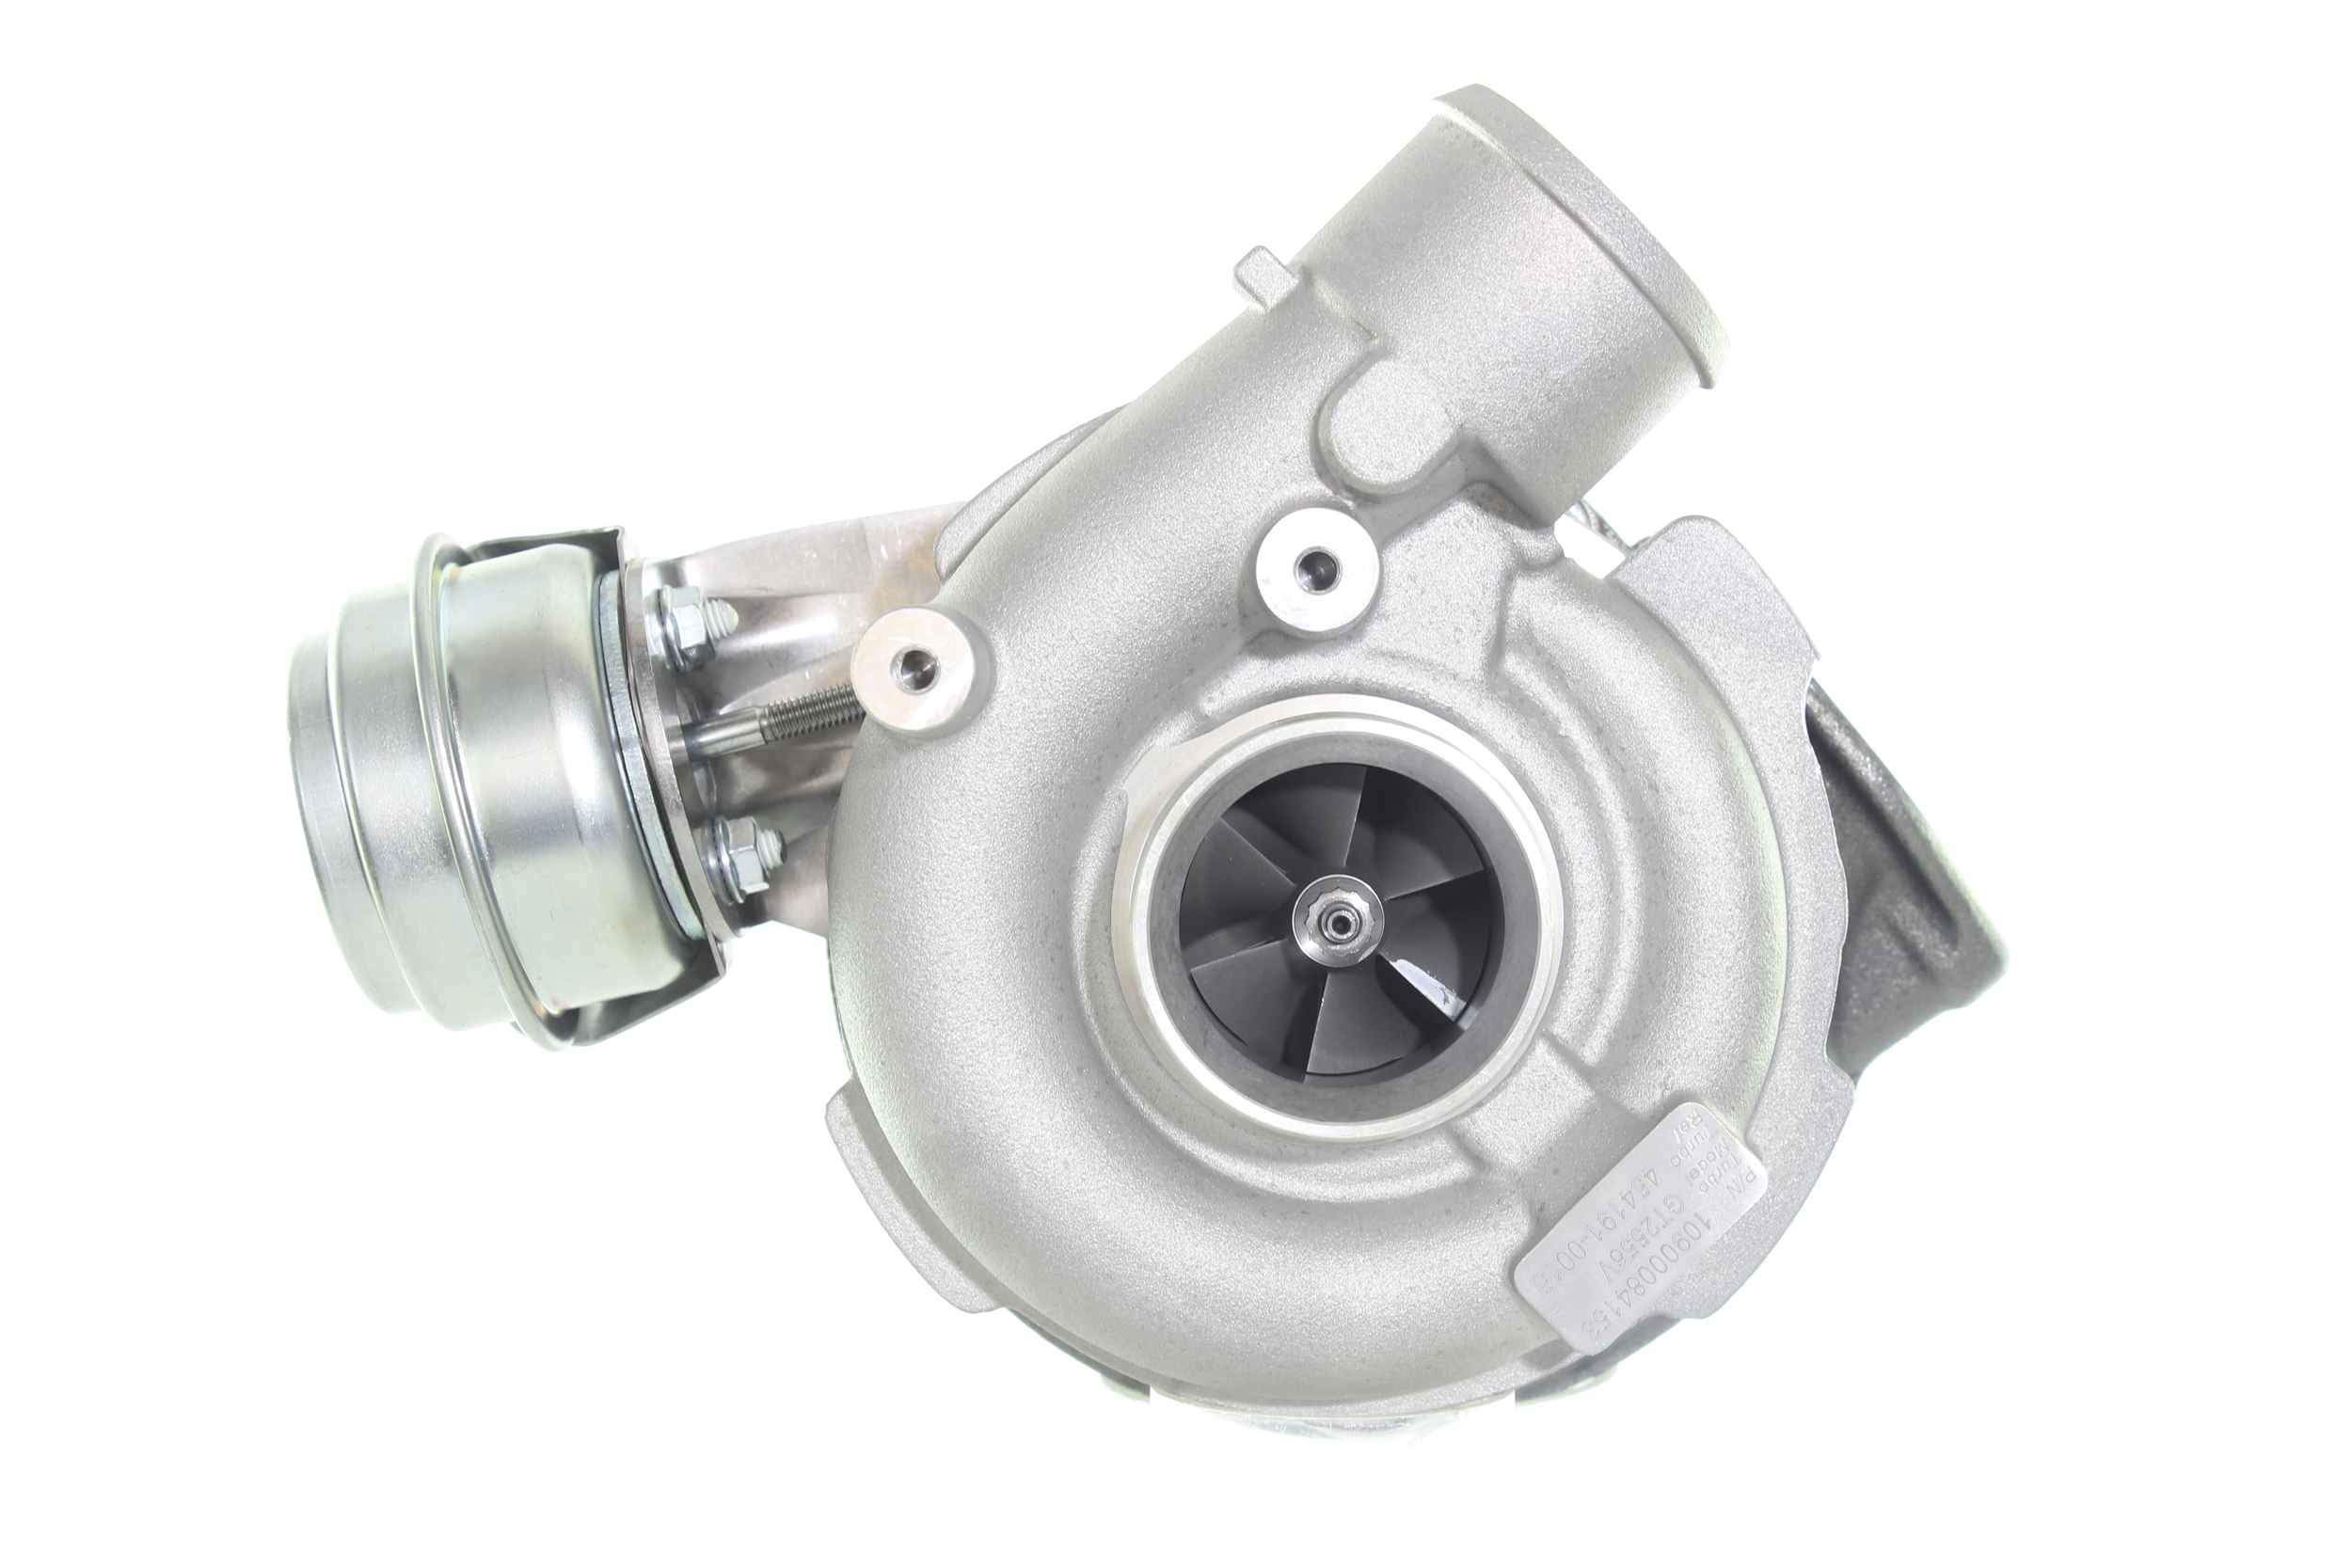 ALANKO 10900084 Turbocharger Exhaust Turbocharger, Incl. Gasket Set, with attachment material